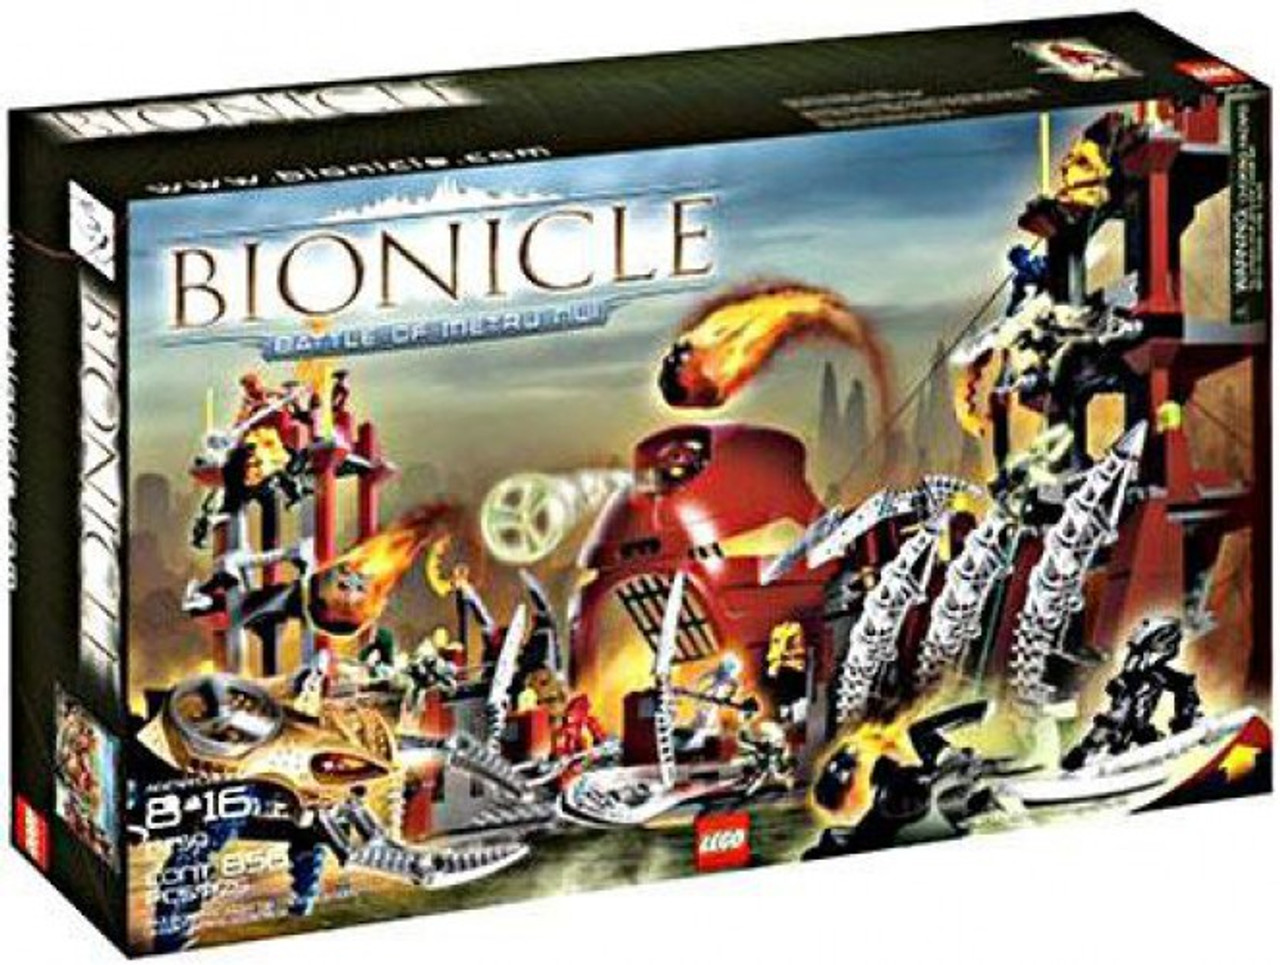 Lego Bionicle Battle Of Metru Nui Set 8759 Toywiz - r roblox what do you think of jaller